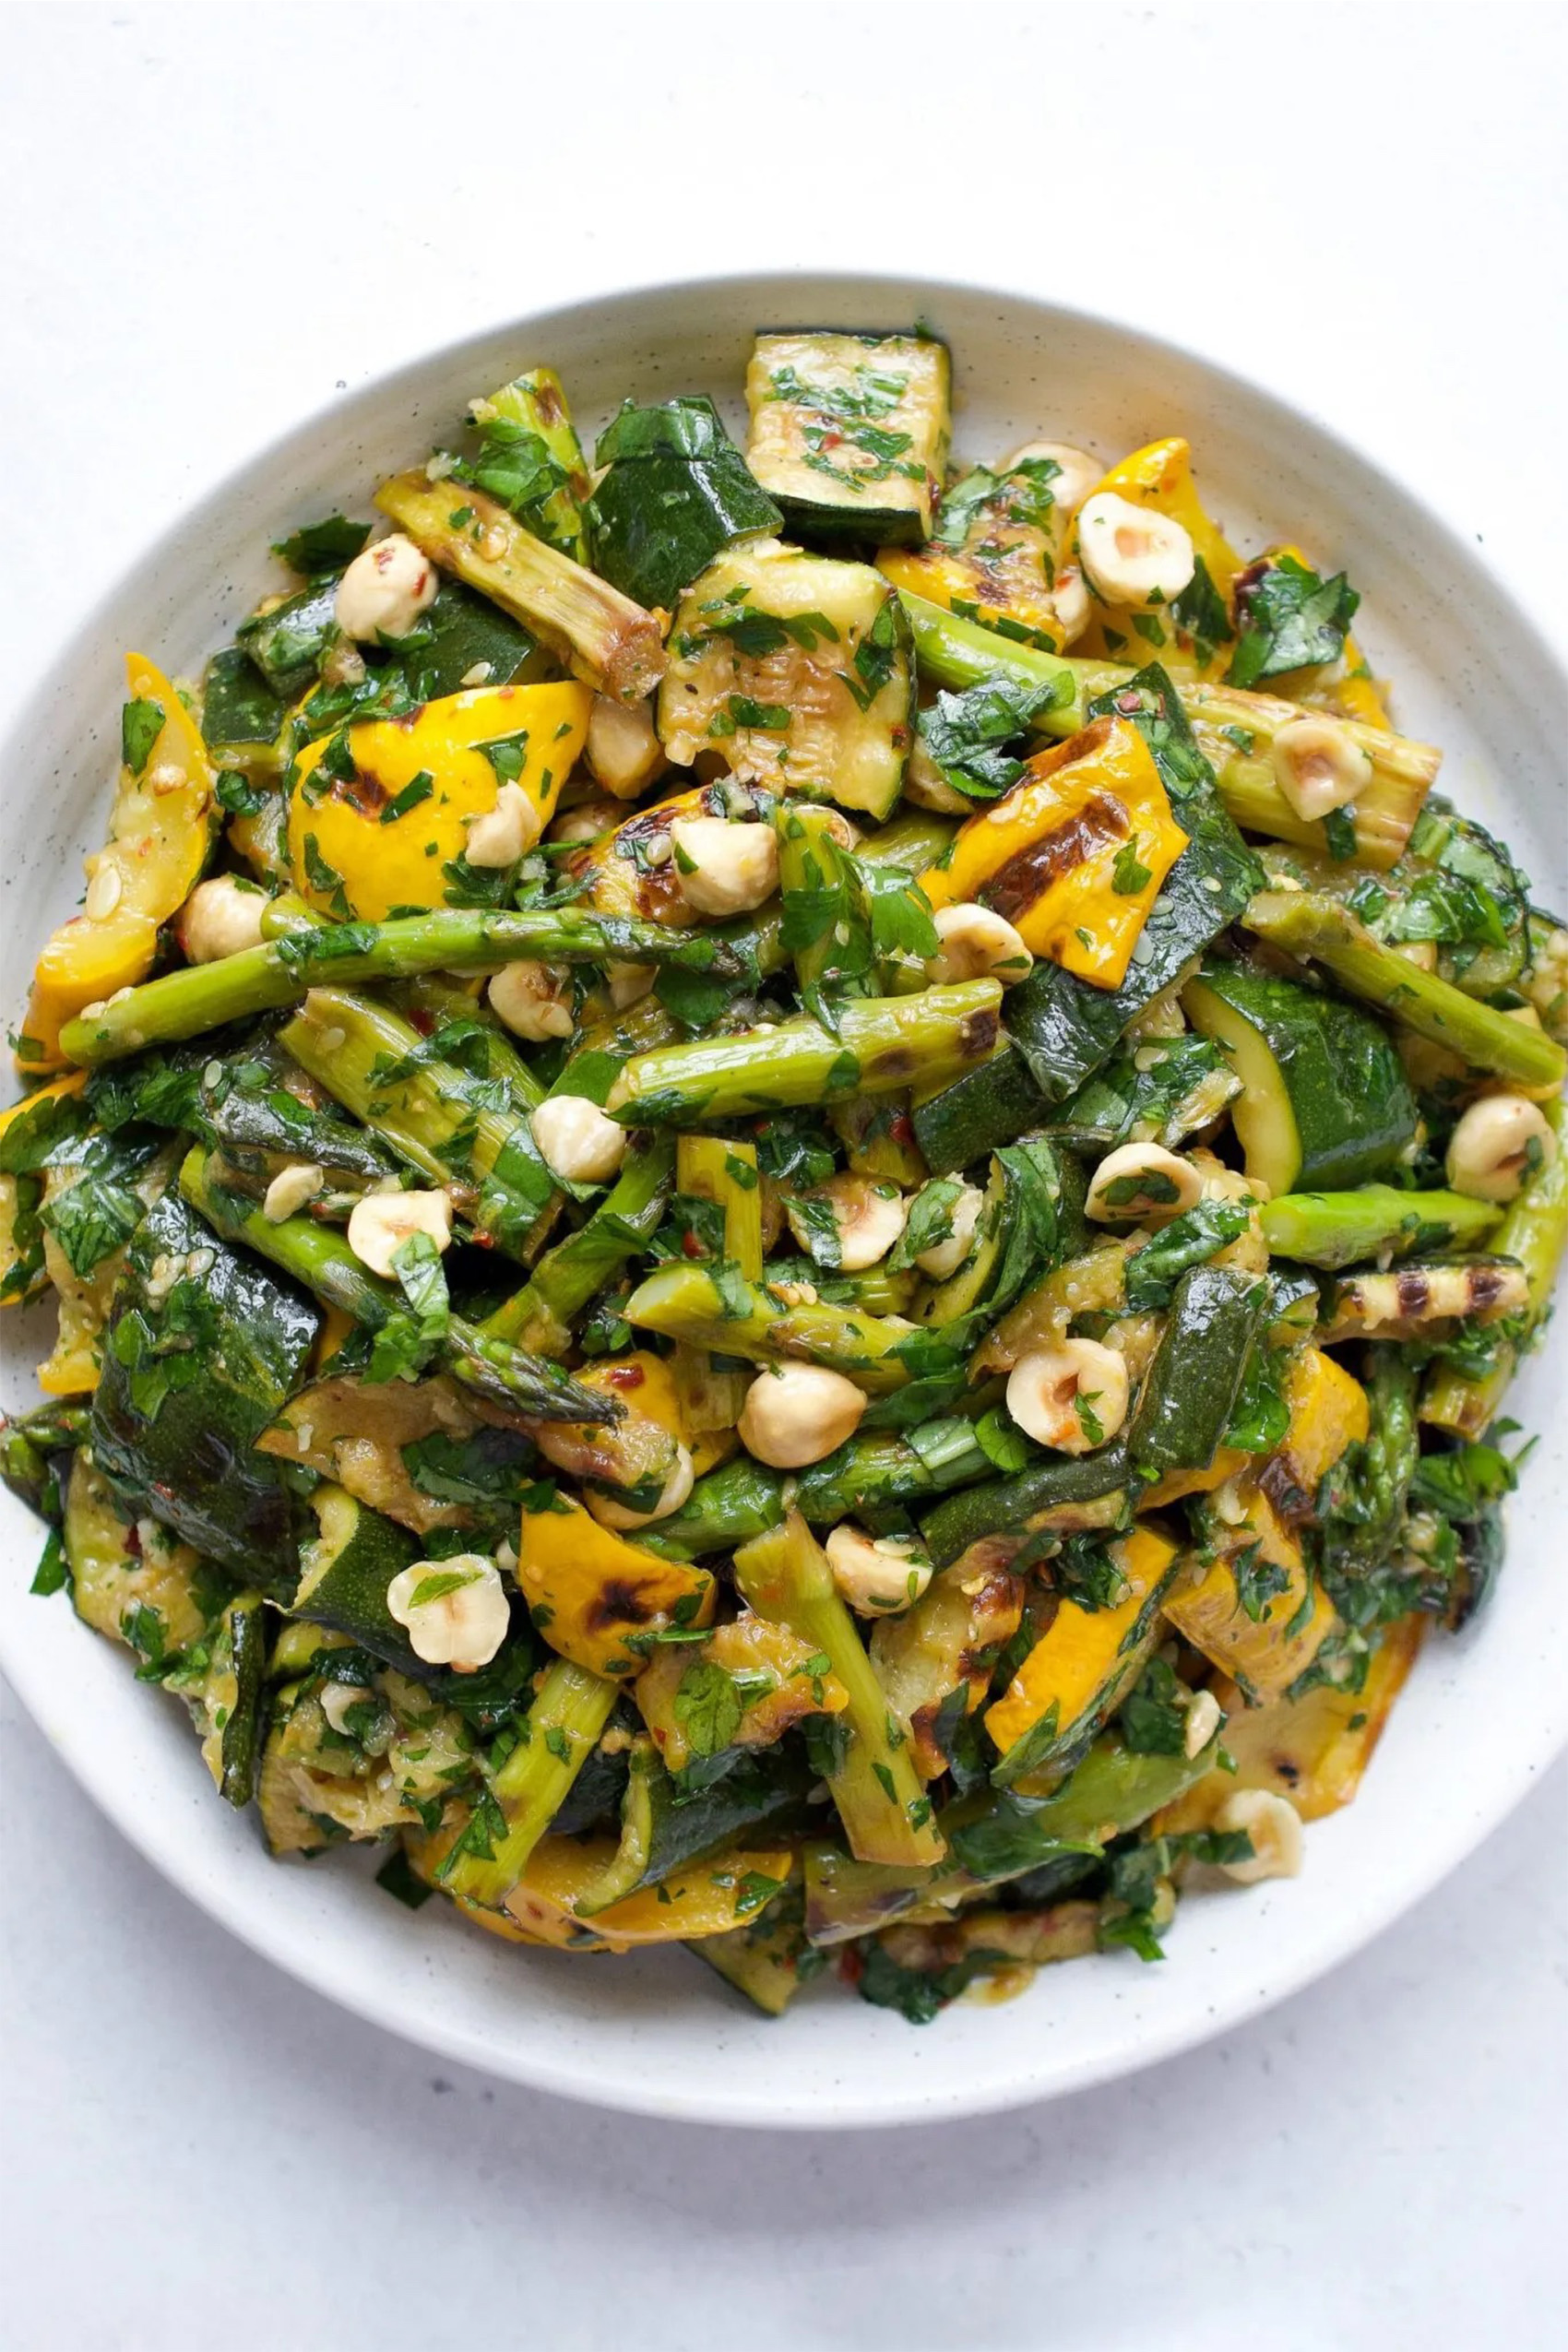 a dish of grilled asparagus and zucchini salad topped with hazelnuts